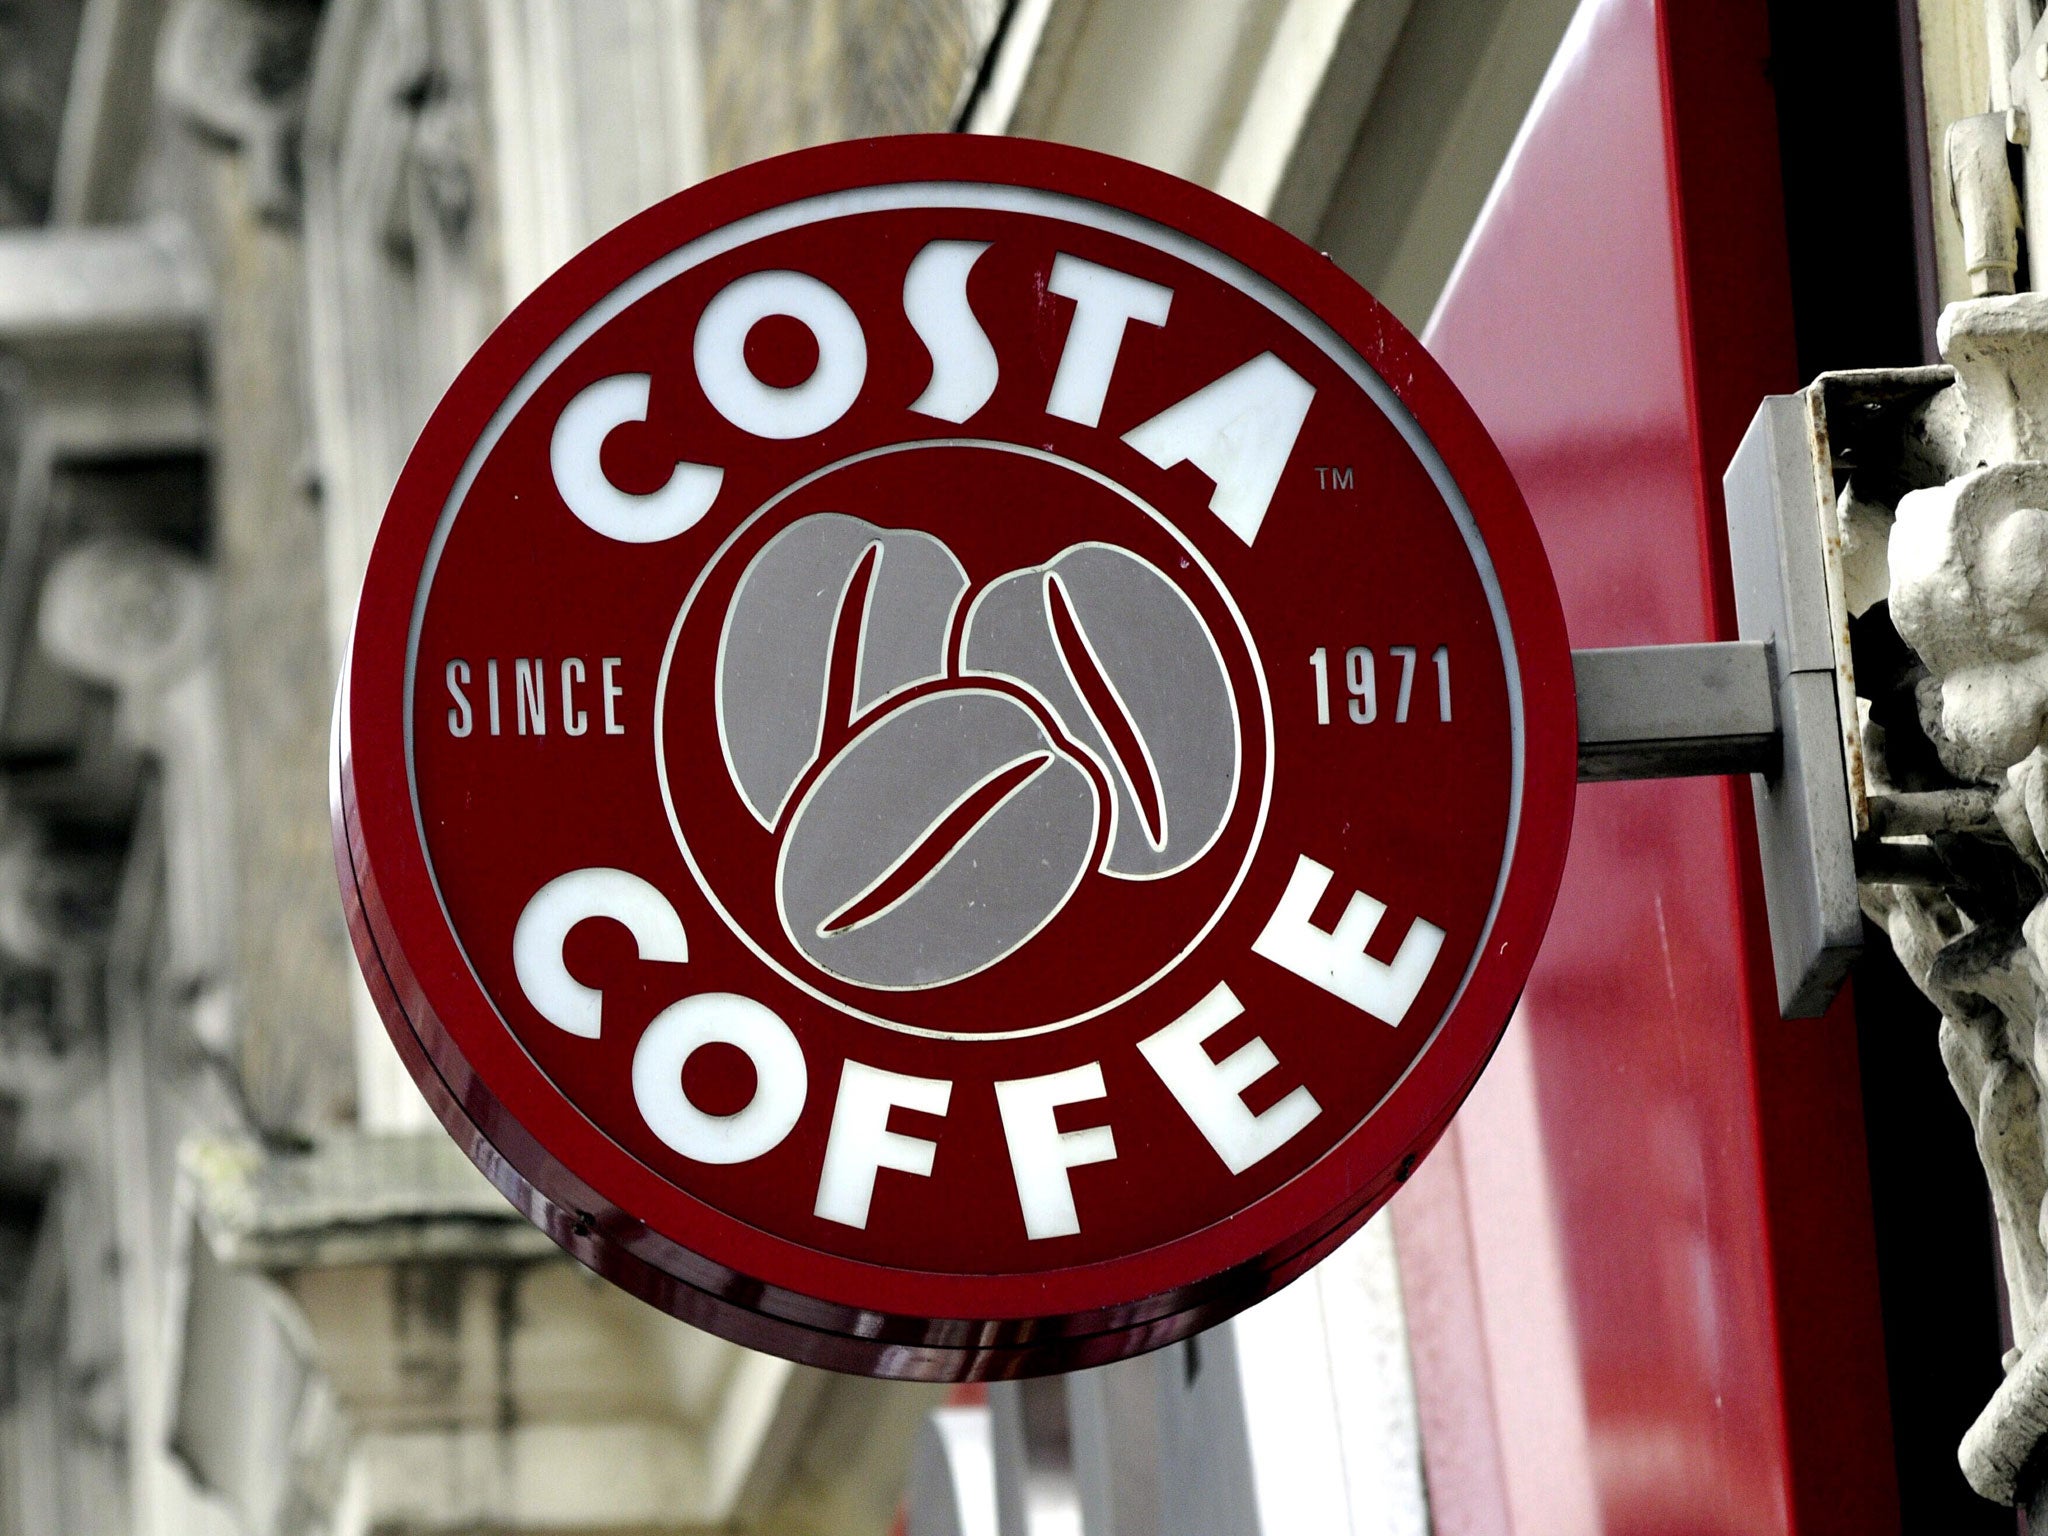 Whitbread said that it is targeting £2.5bn in coffee sales by 2020